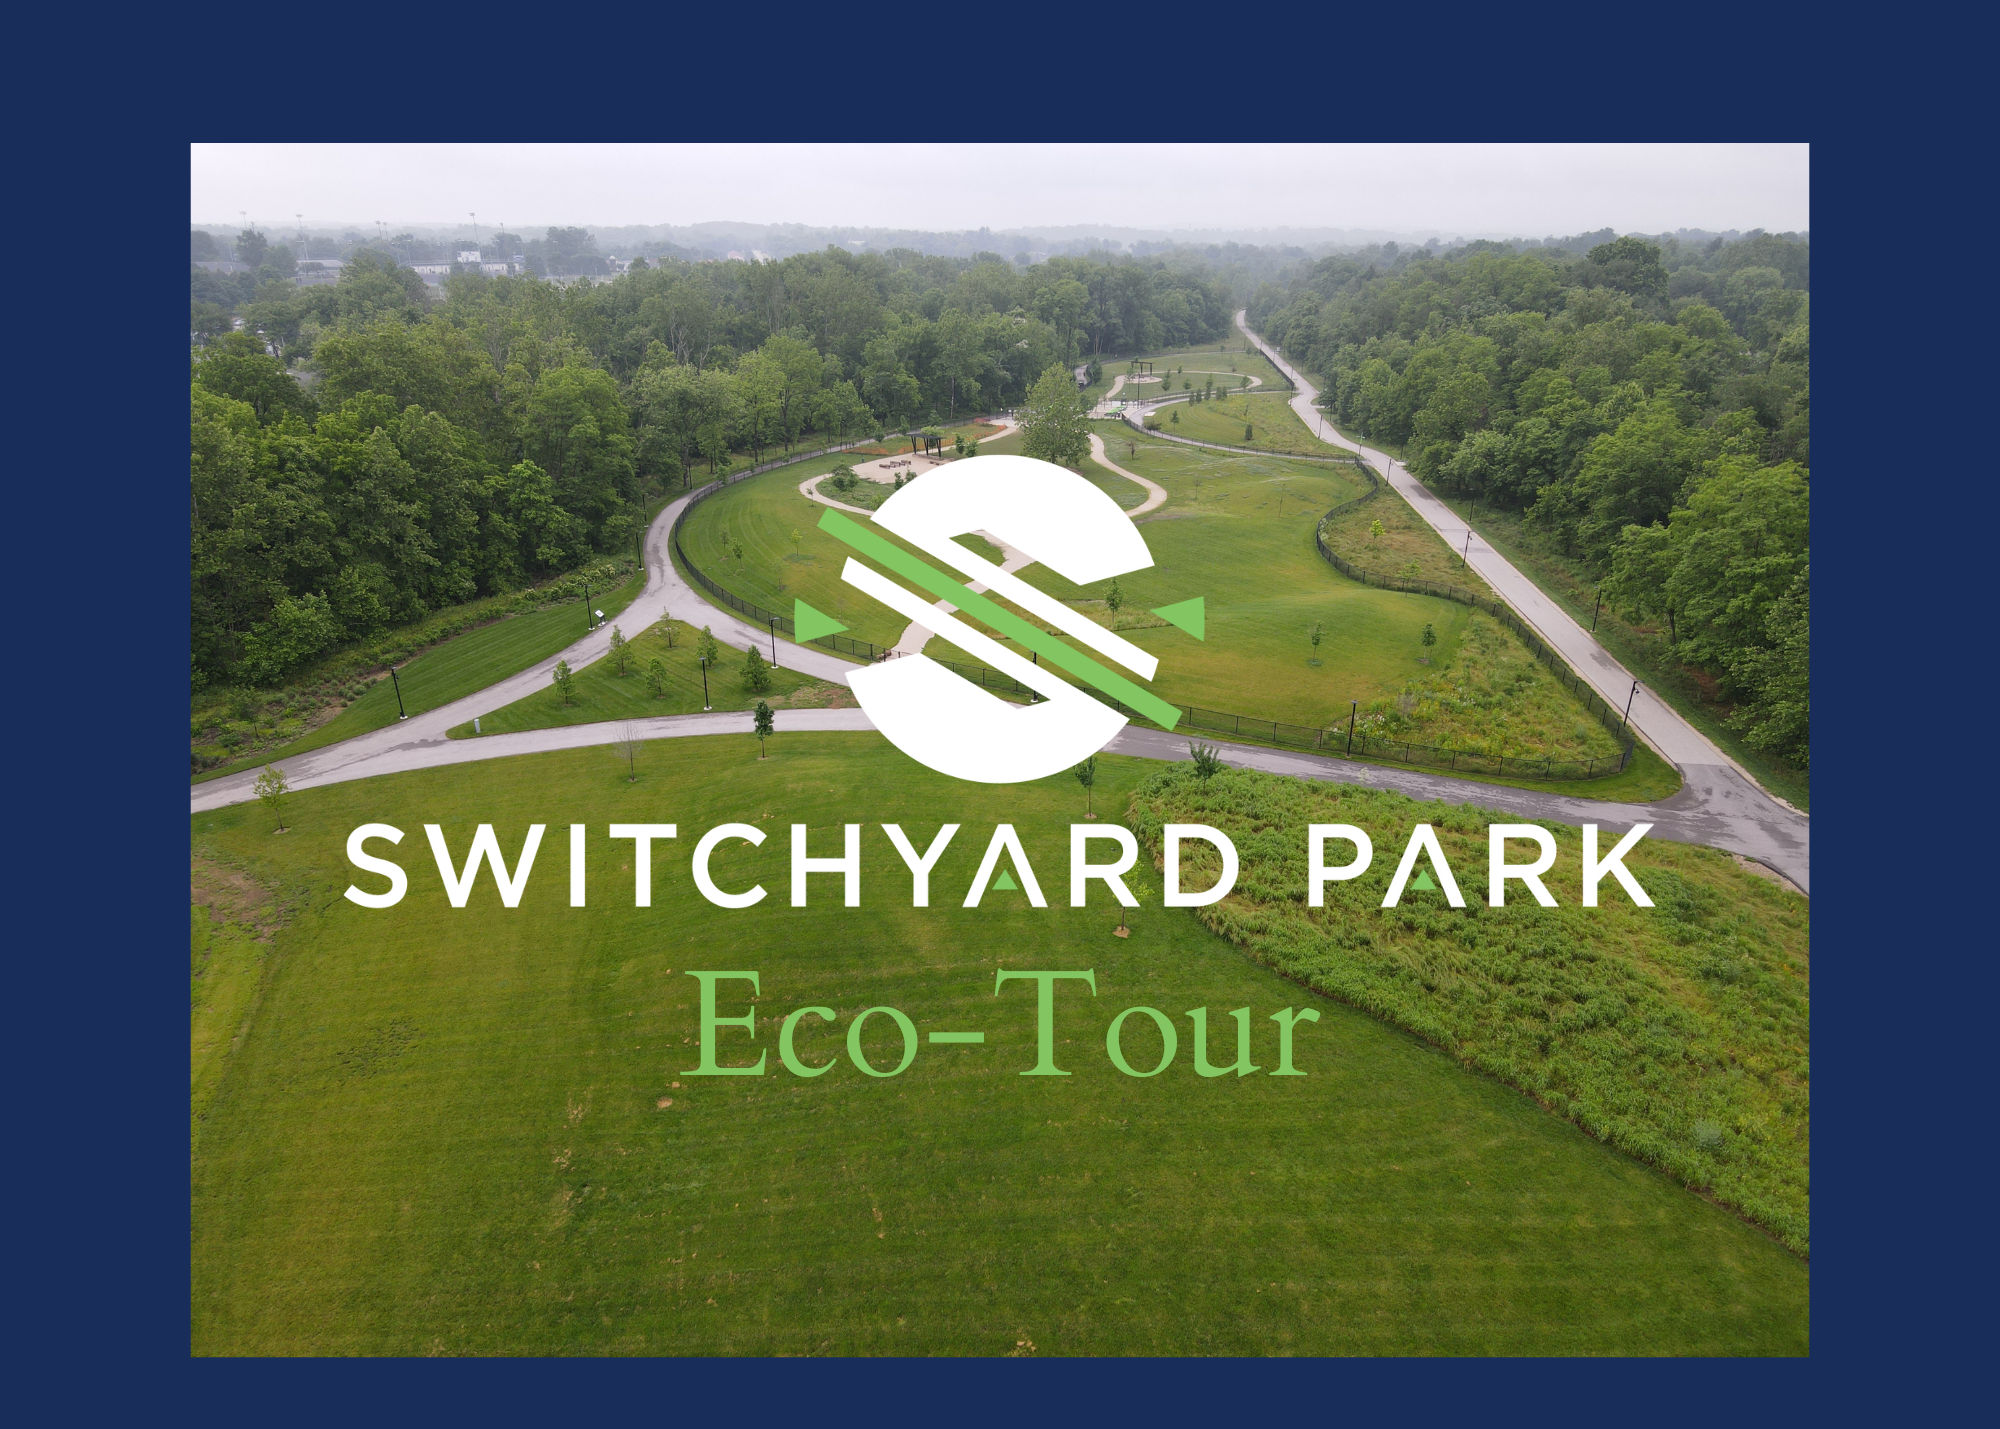 Switchyard Park Eco-Tour - Cover